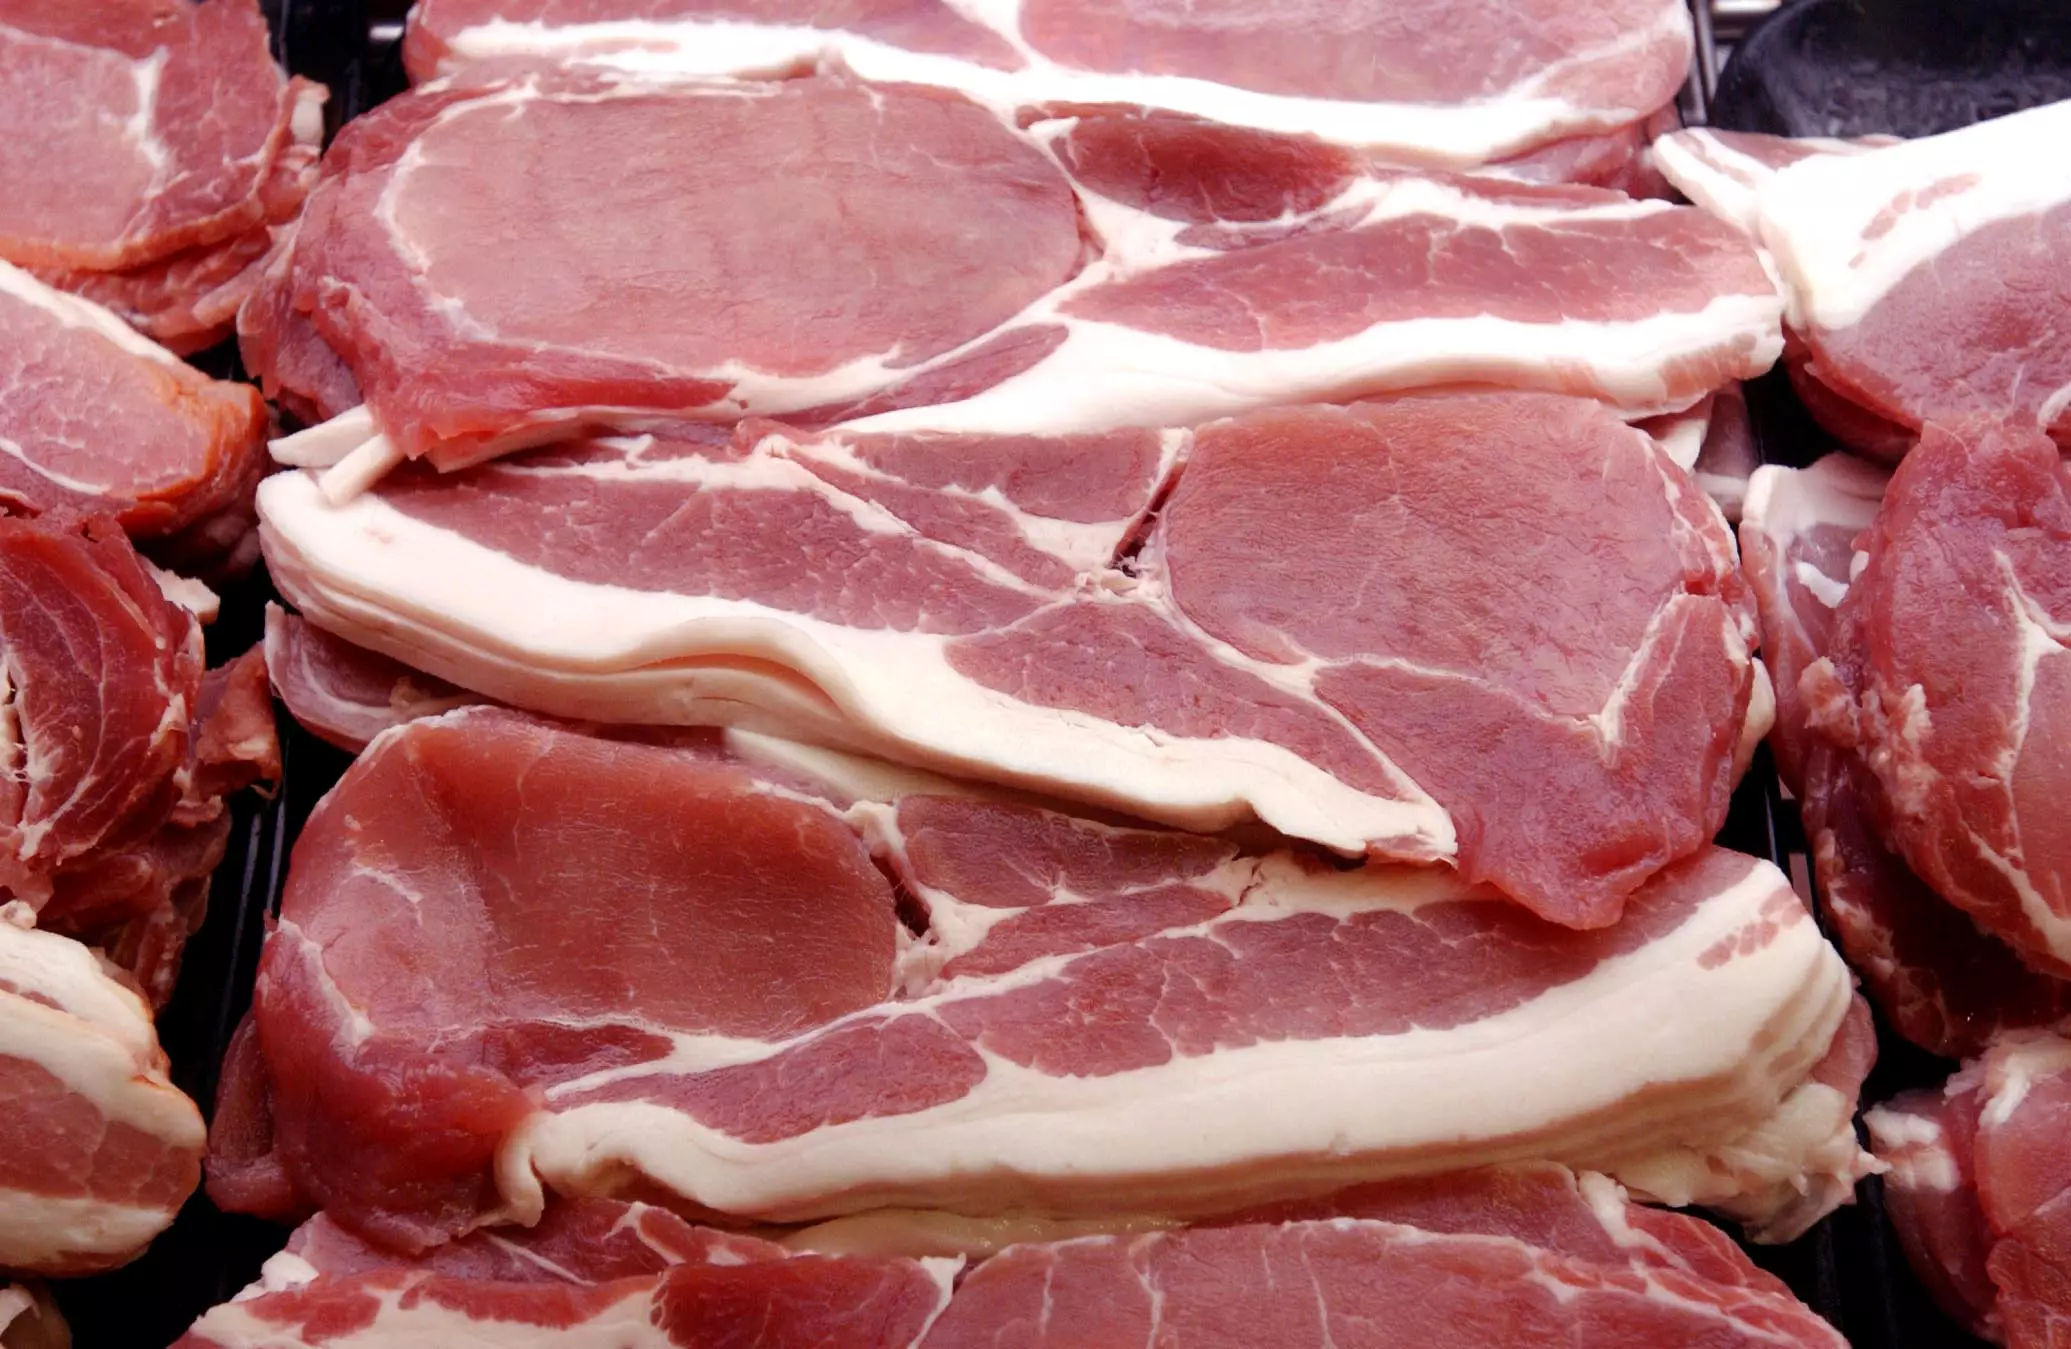 Campaigners have raised concerns about the health risks associated with eating bacon.